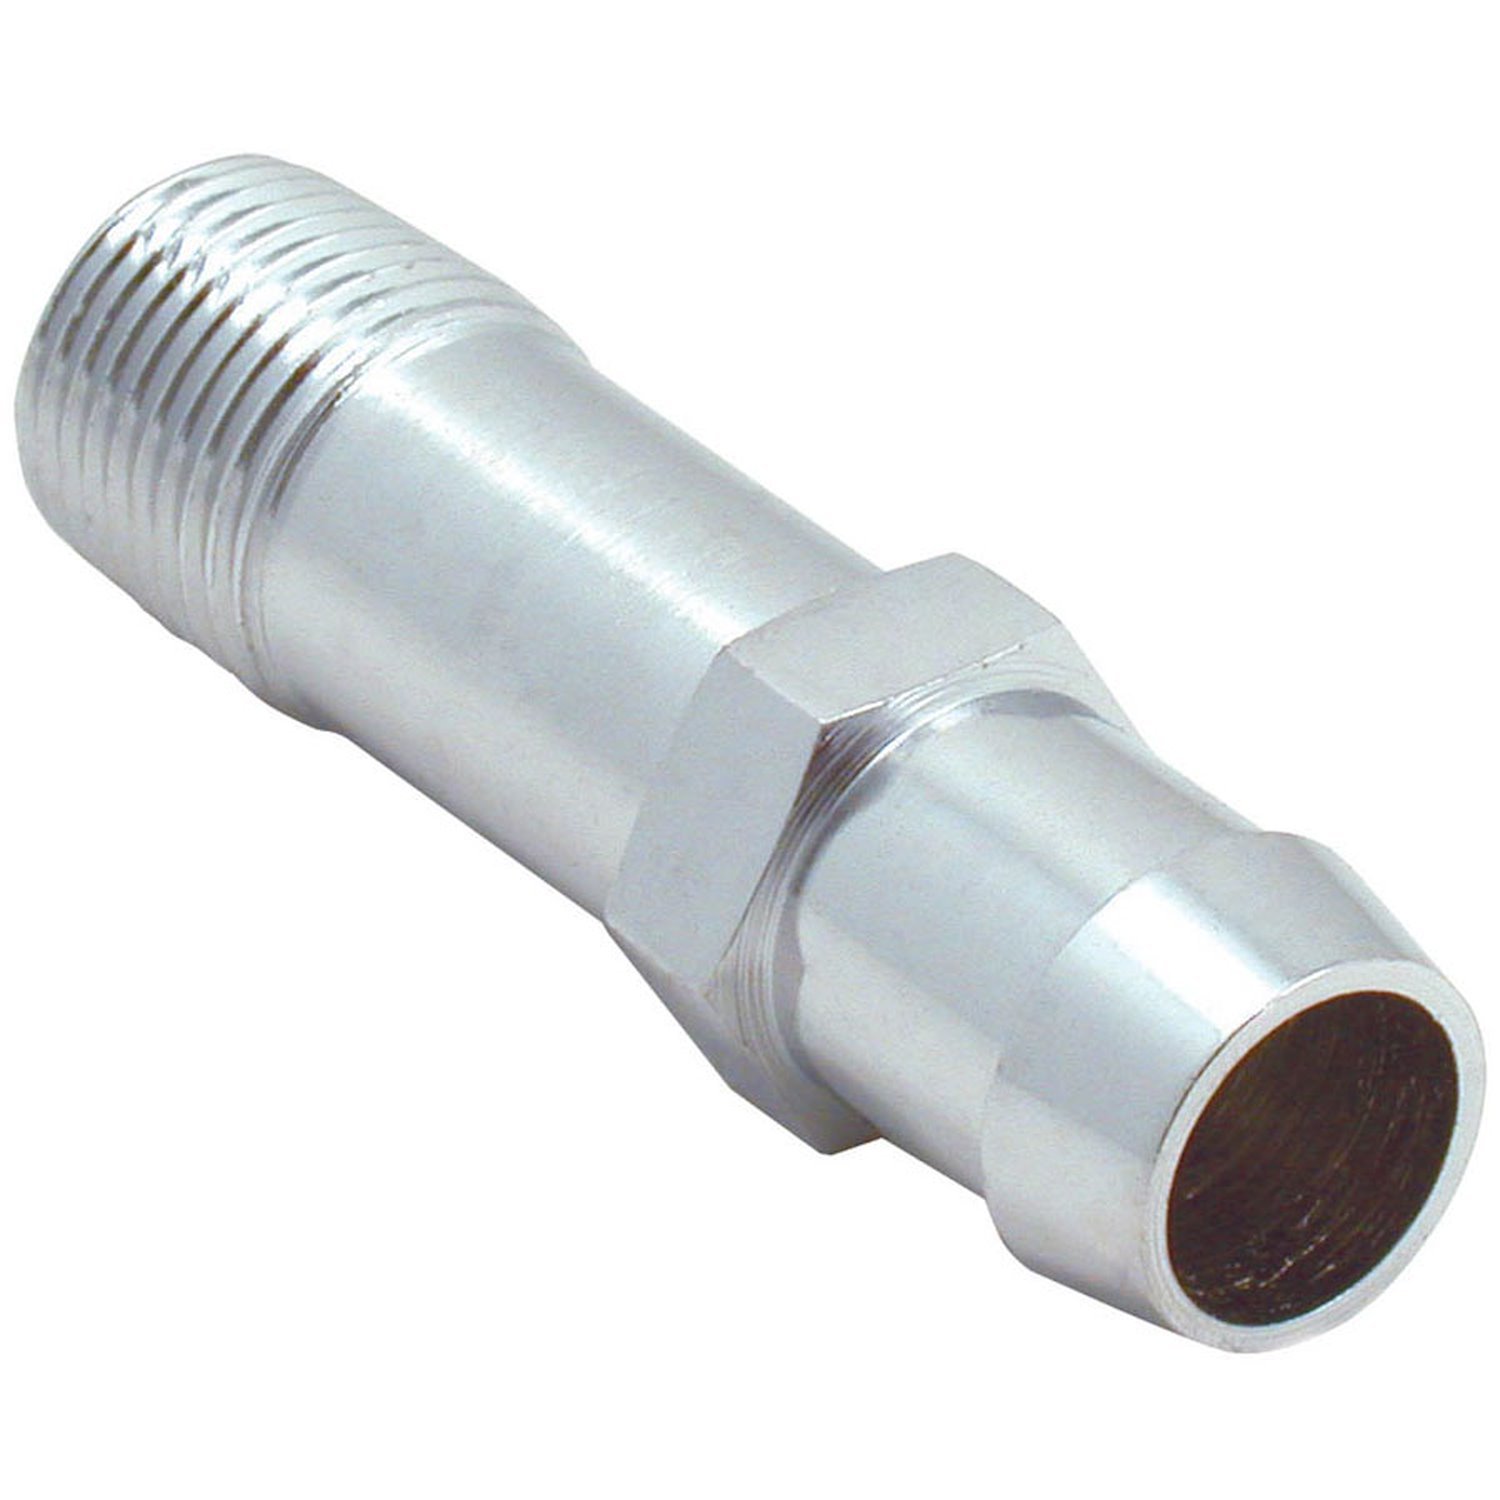 Heater Hose Fitting 1/2" NPT to 3/4" Barb